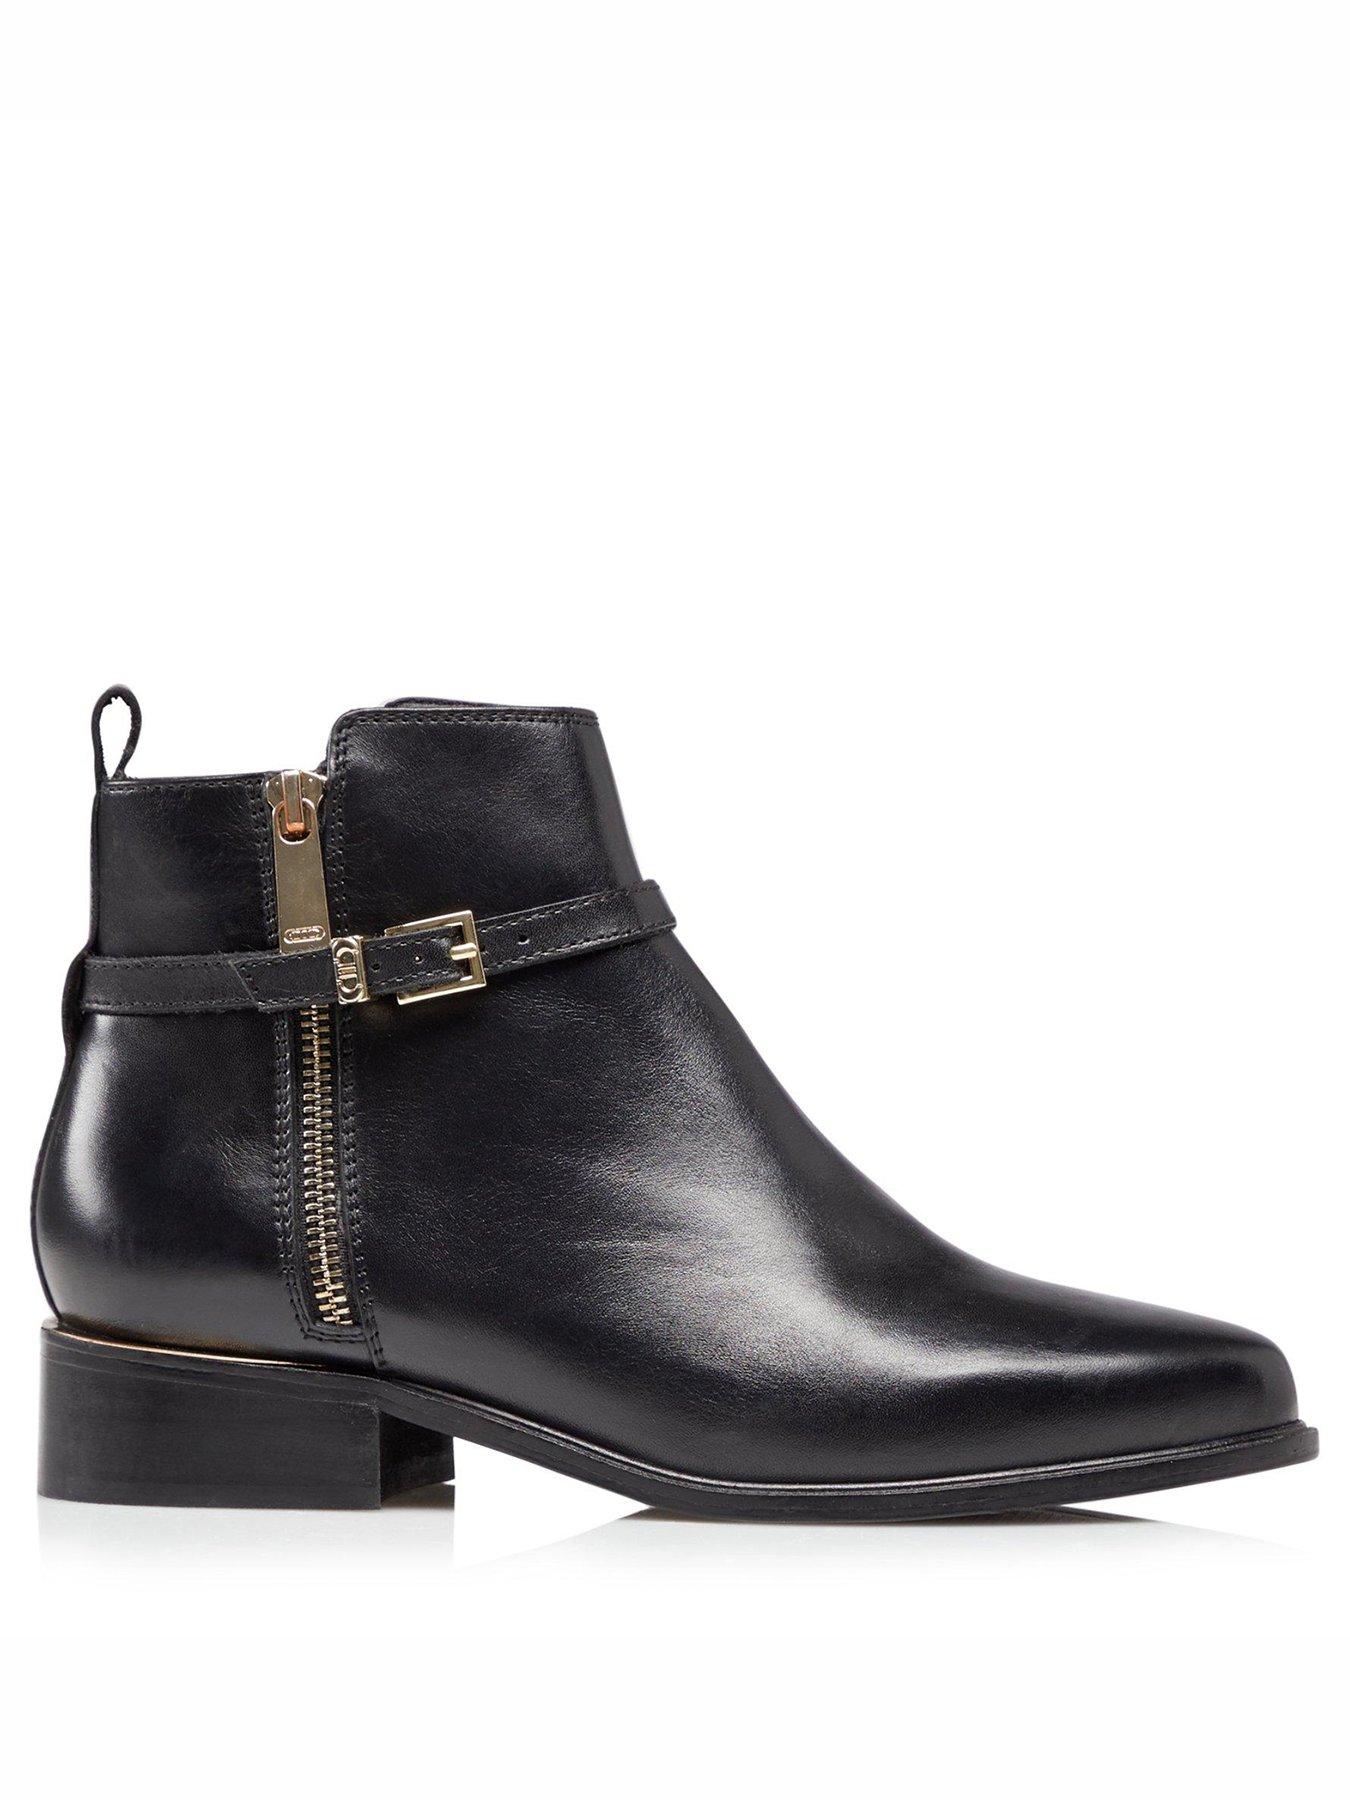  Wide Fit Pop Leather Buckle Trim Ankle Boot - Black